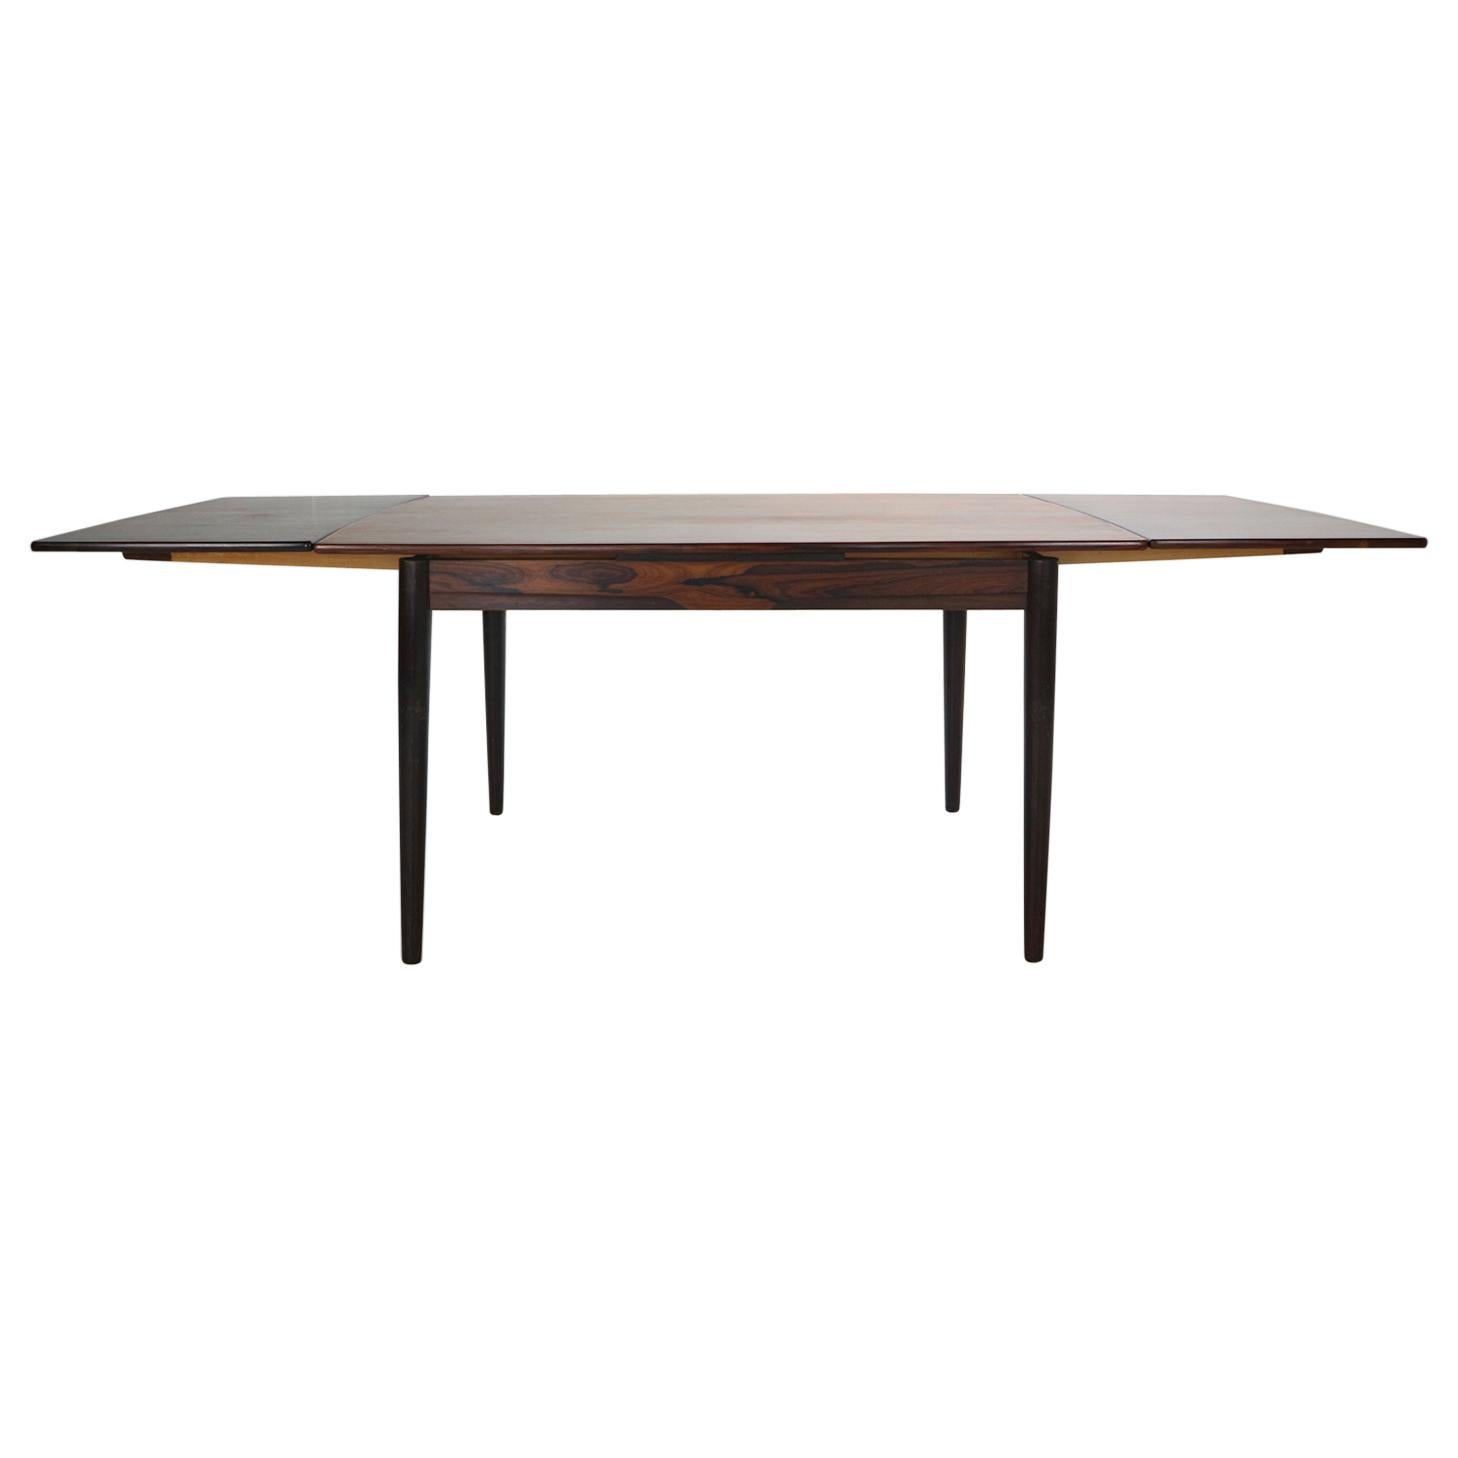 Midcentury Danish Design Extendable Dining Table, 1960s